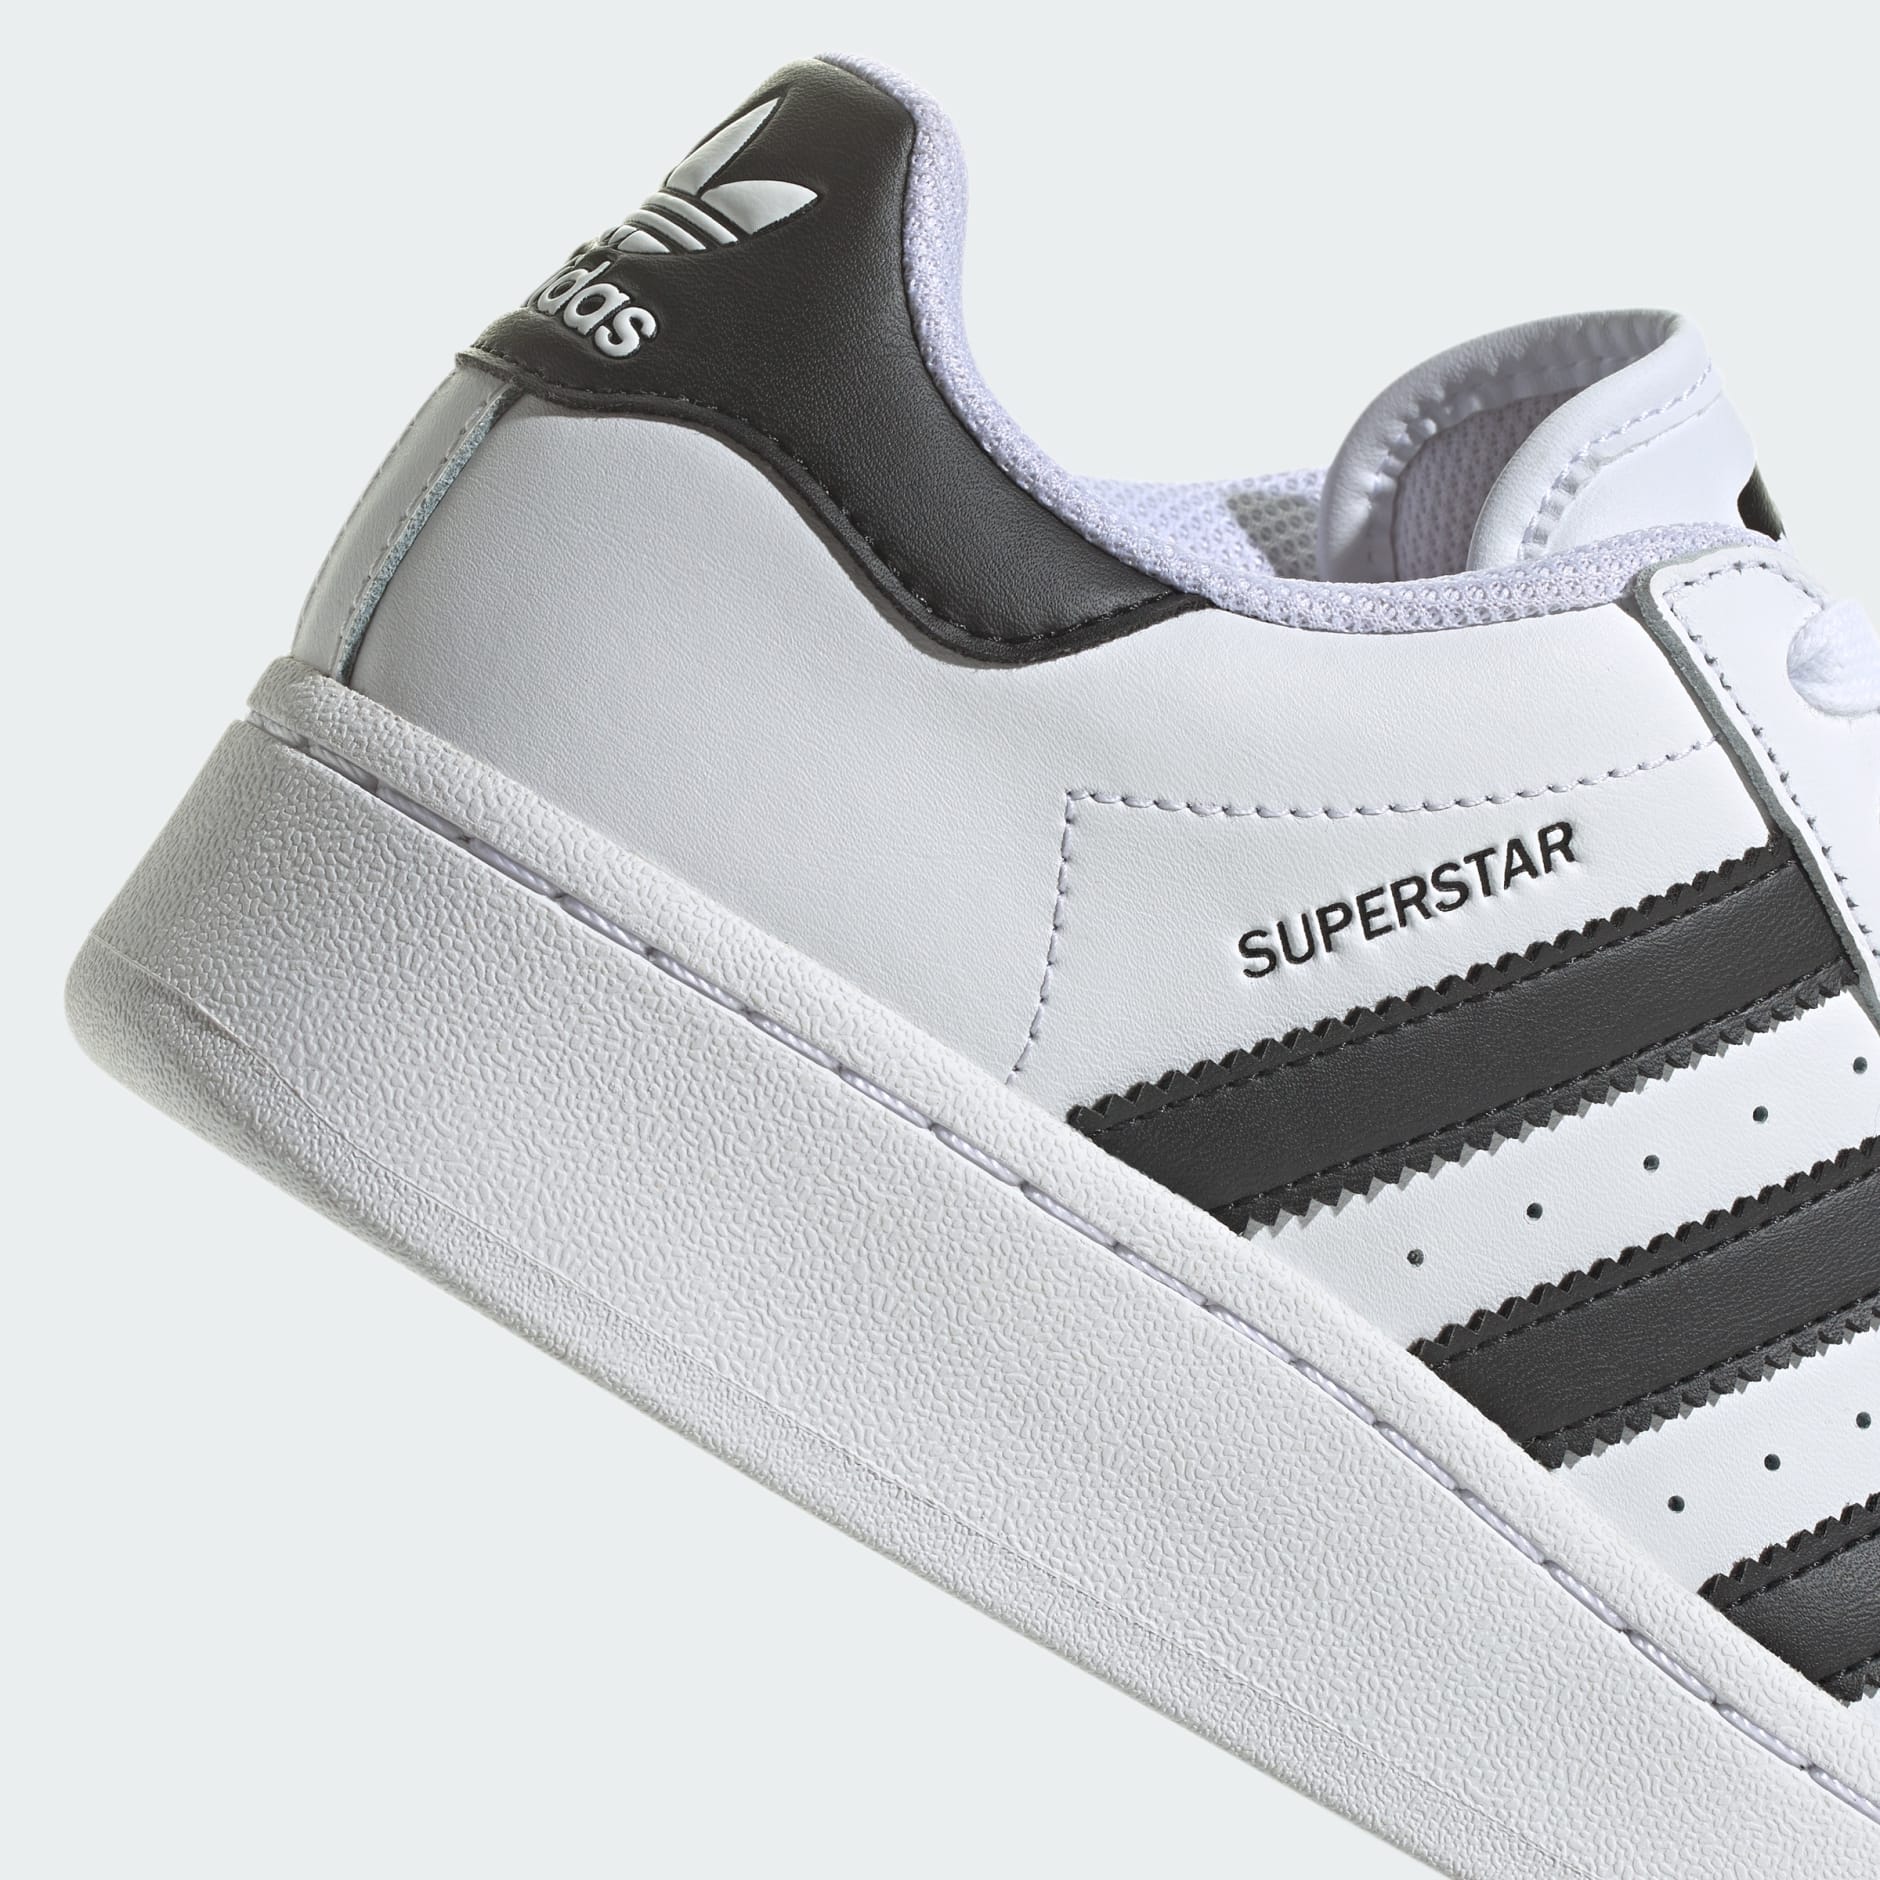 adidas Superstar XLG Shoes - White | adidas LK